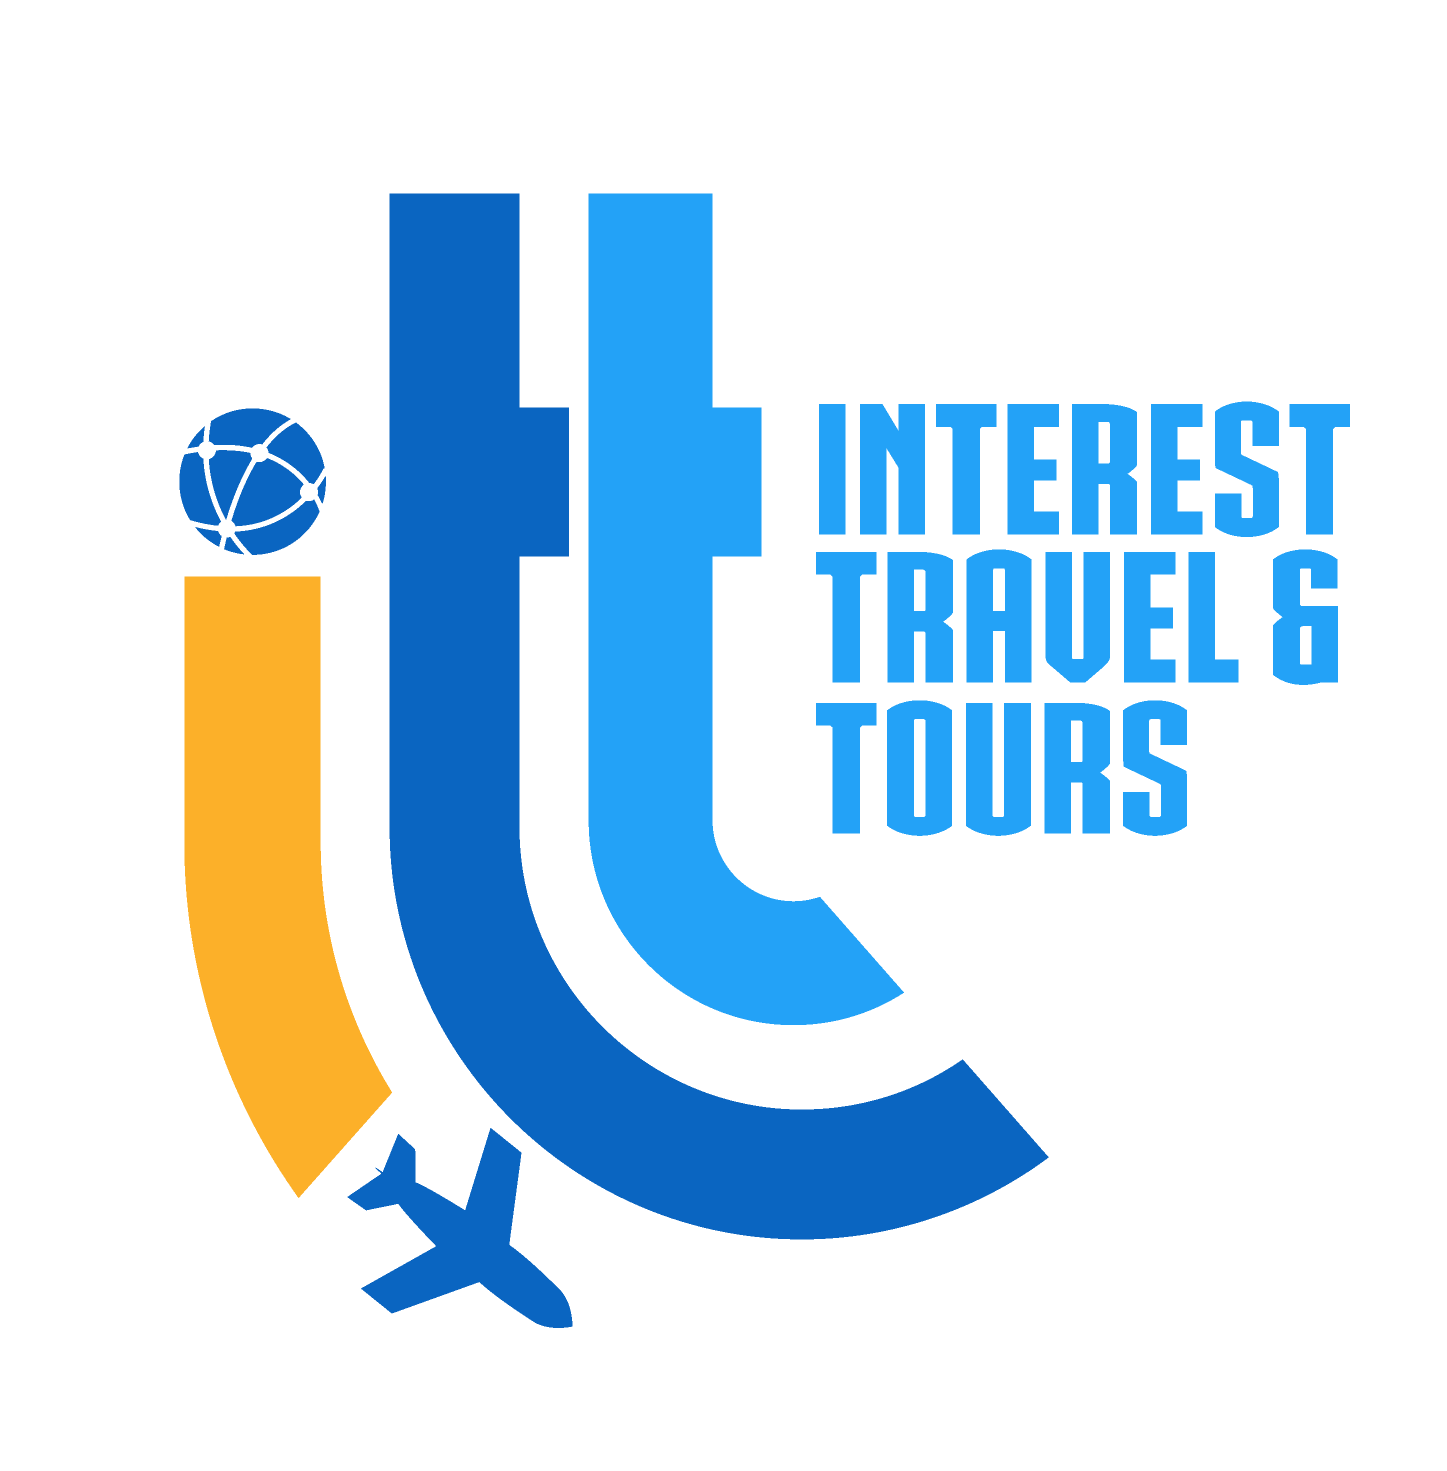 Interest Travel And Tours | DecemberinGH Tours - Interest Travel And Tours